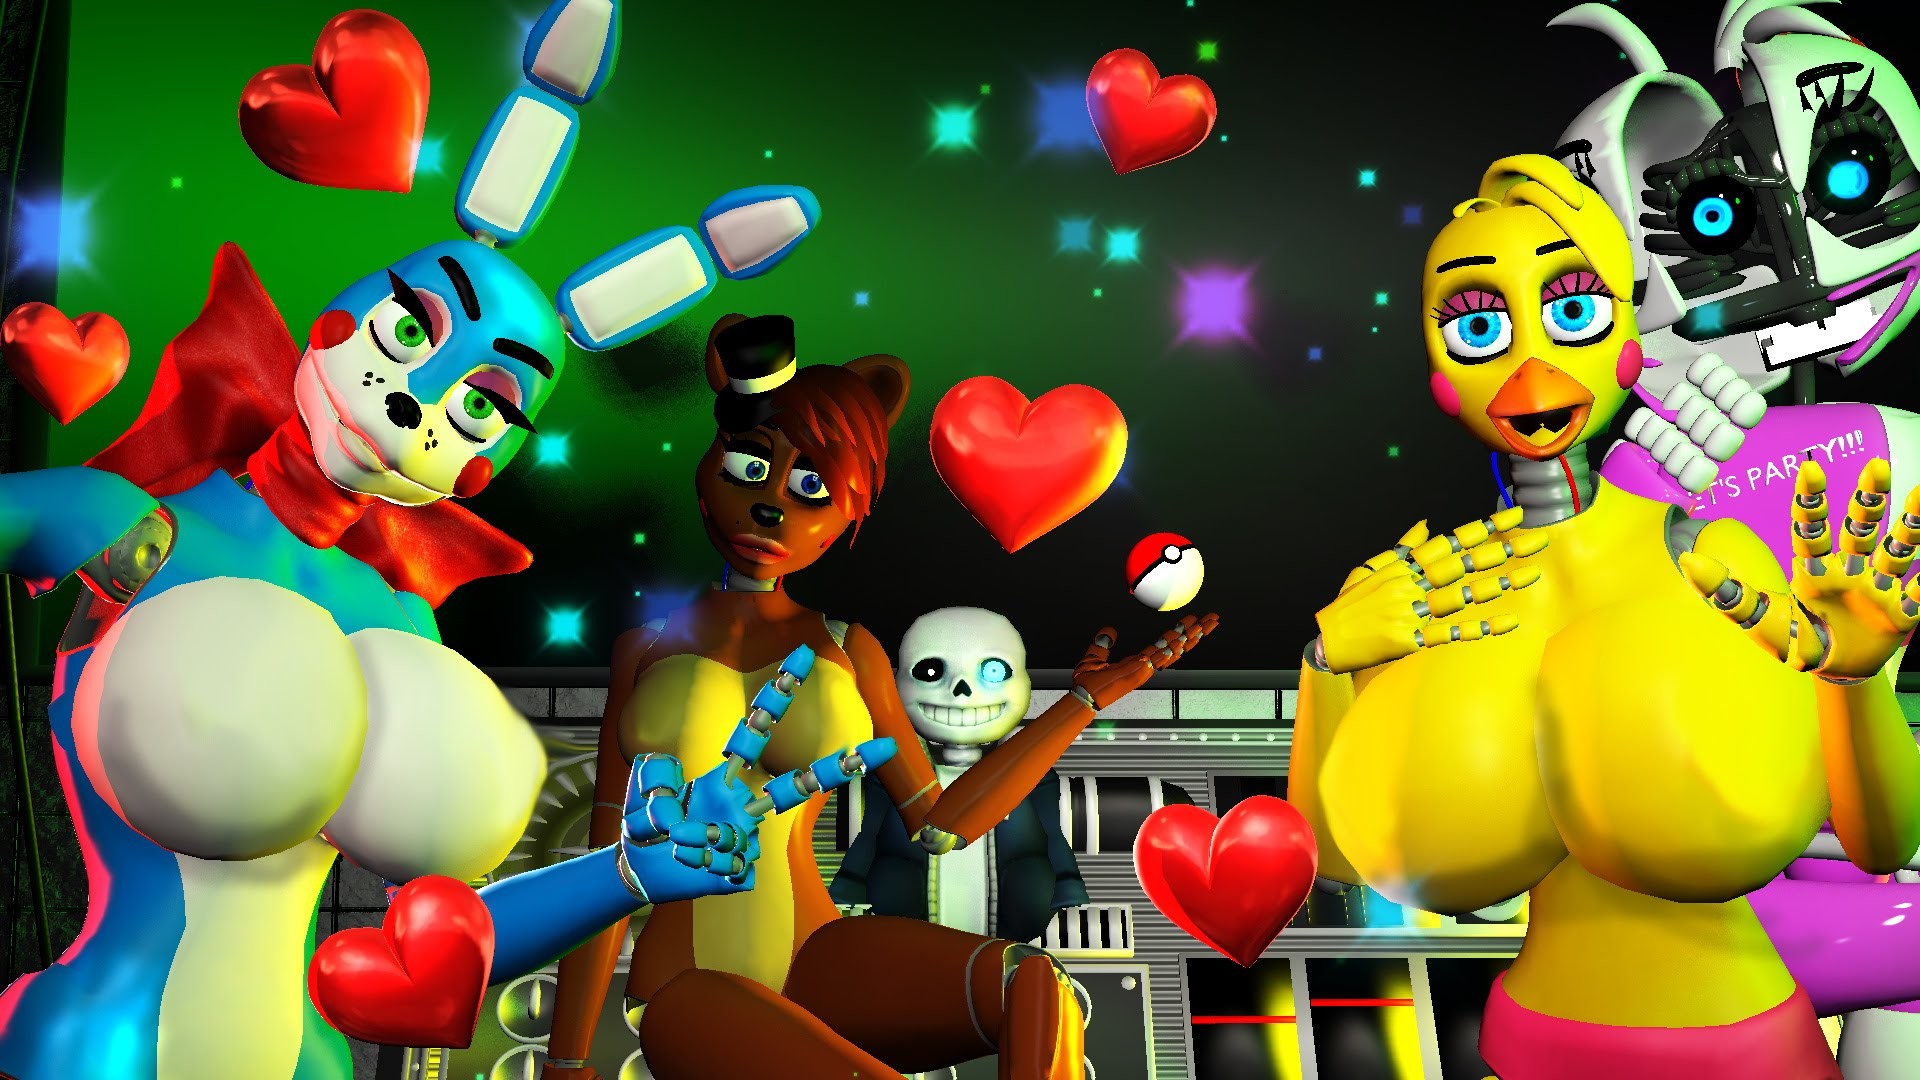 Five nights at anime sister location jumplove compilation sfm 1920x1080.